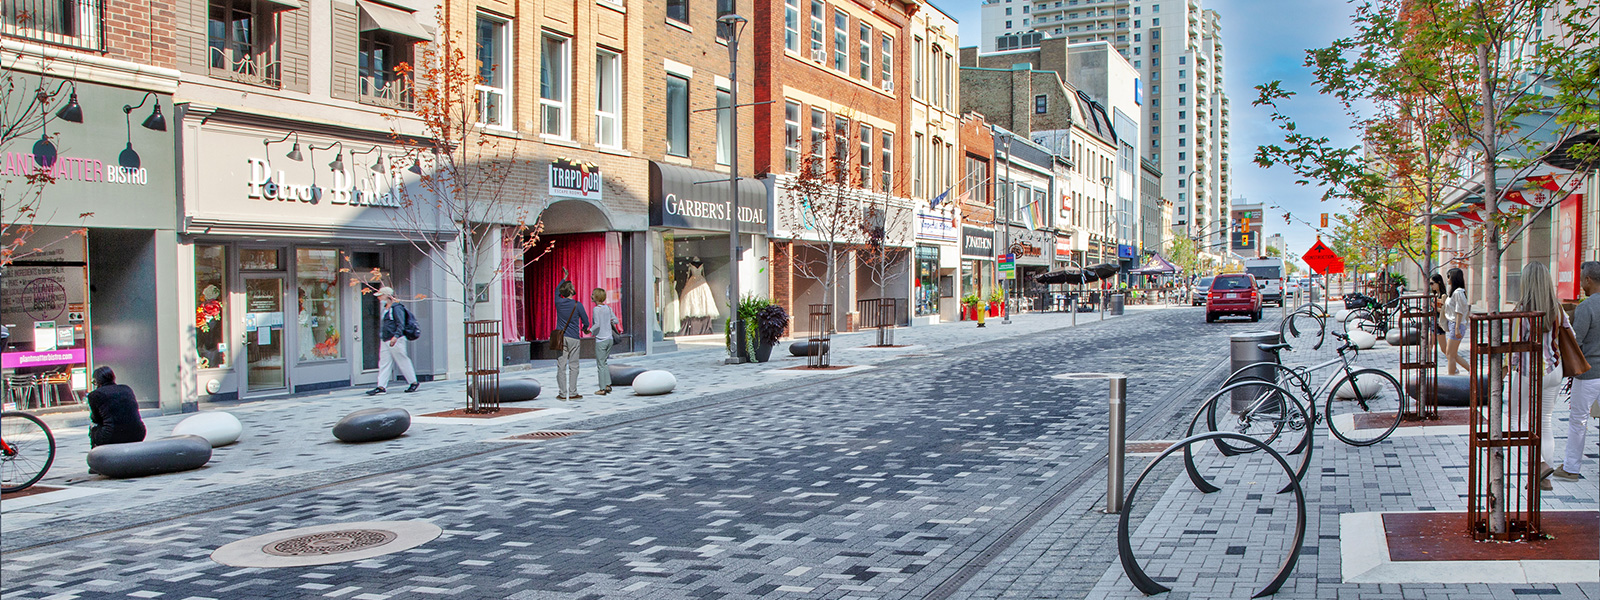 London, Ontario, Dundas Place flexible street rendering. Street is lined with shops, pedestrians, bicycles and vehicles.